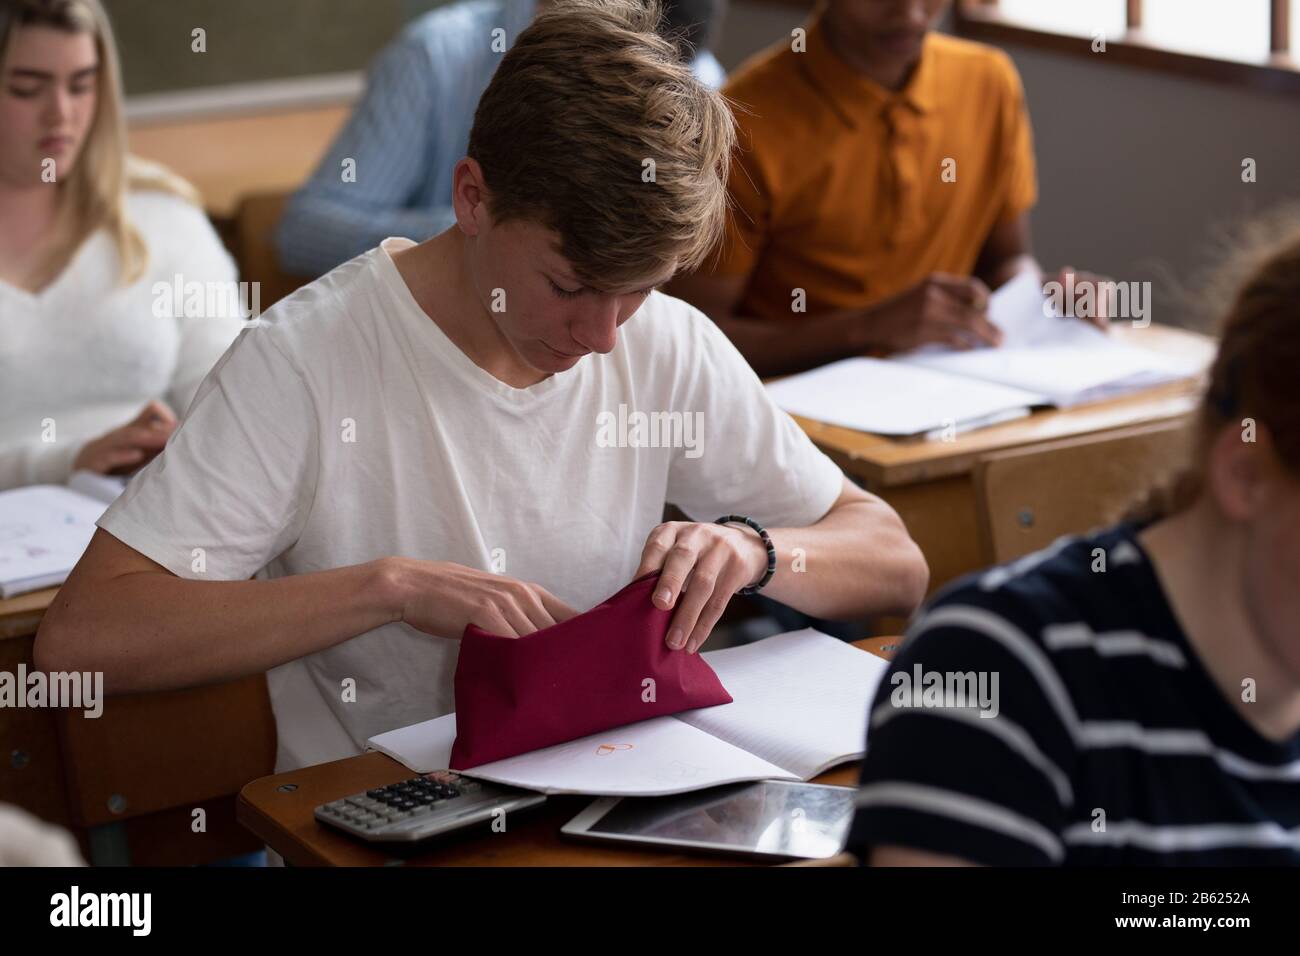 Side view of student choosing a pen to write Stock Photo